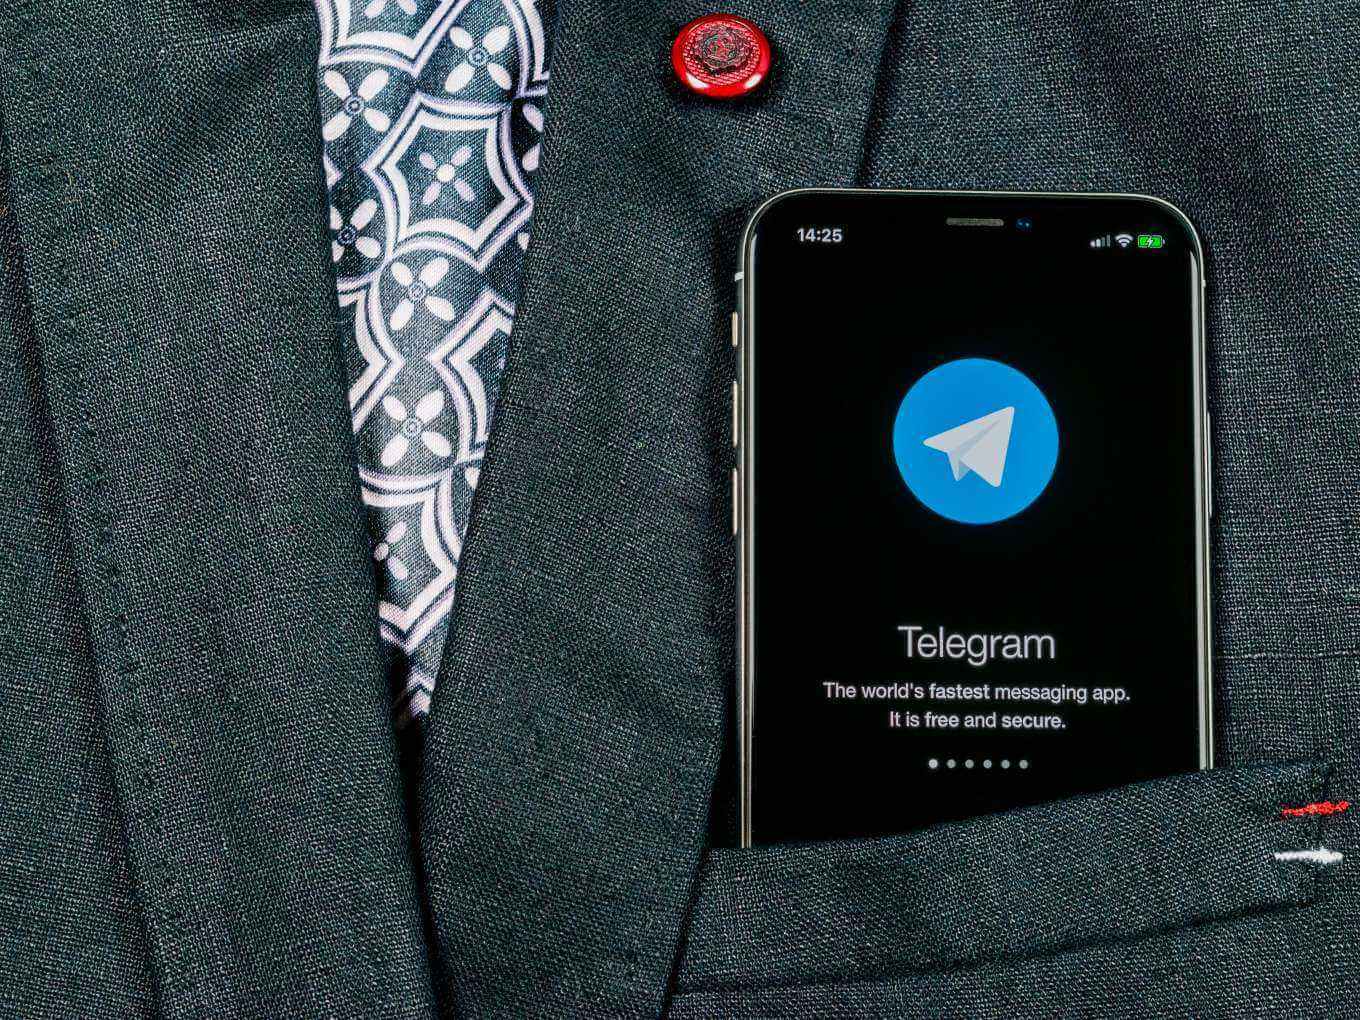 Telegram shows rapid growth in india but is it really secure?